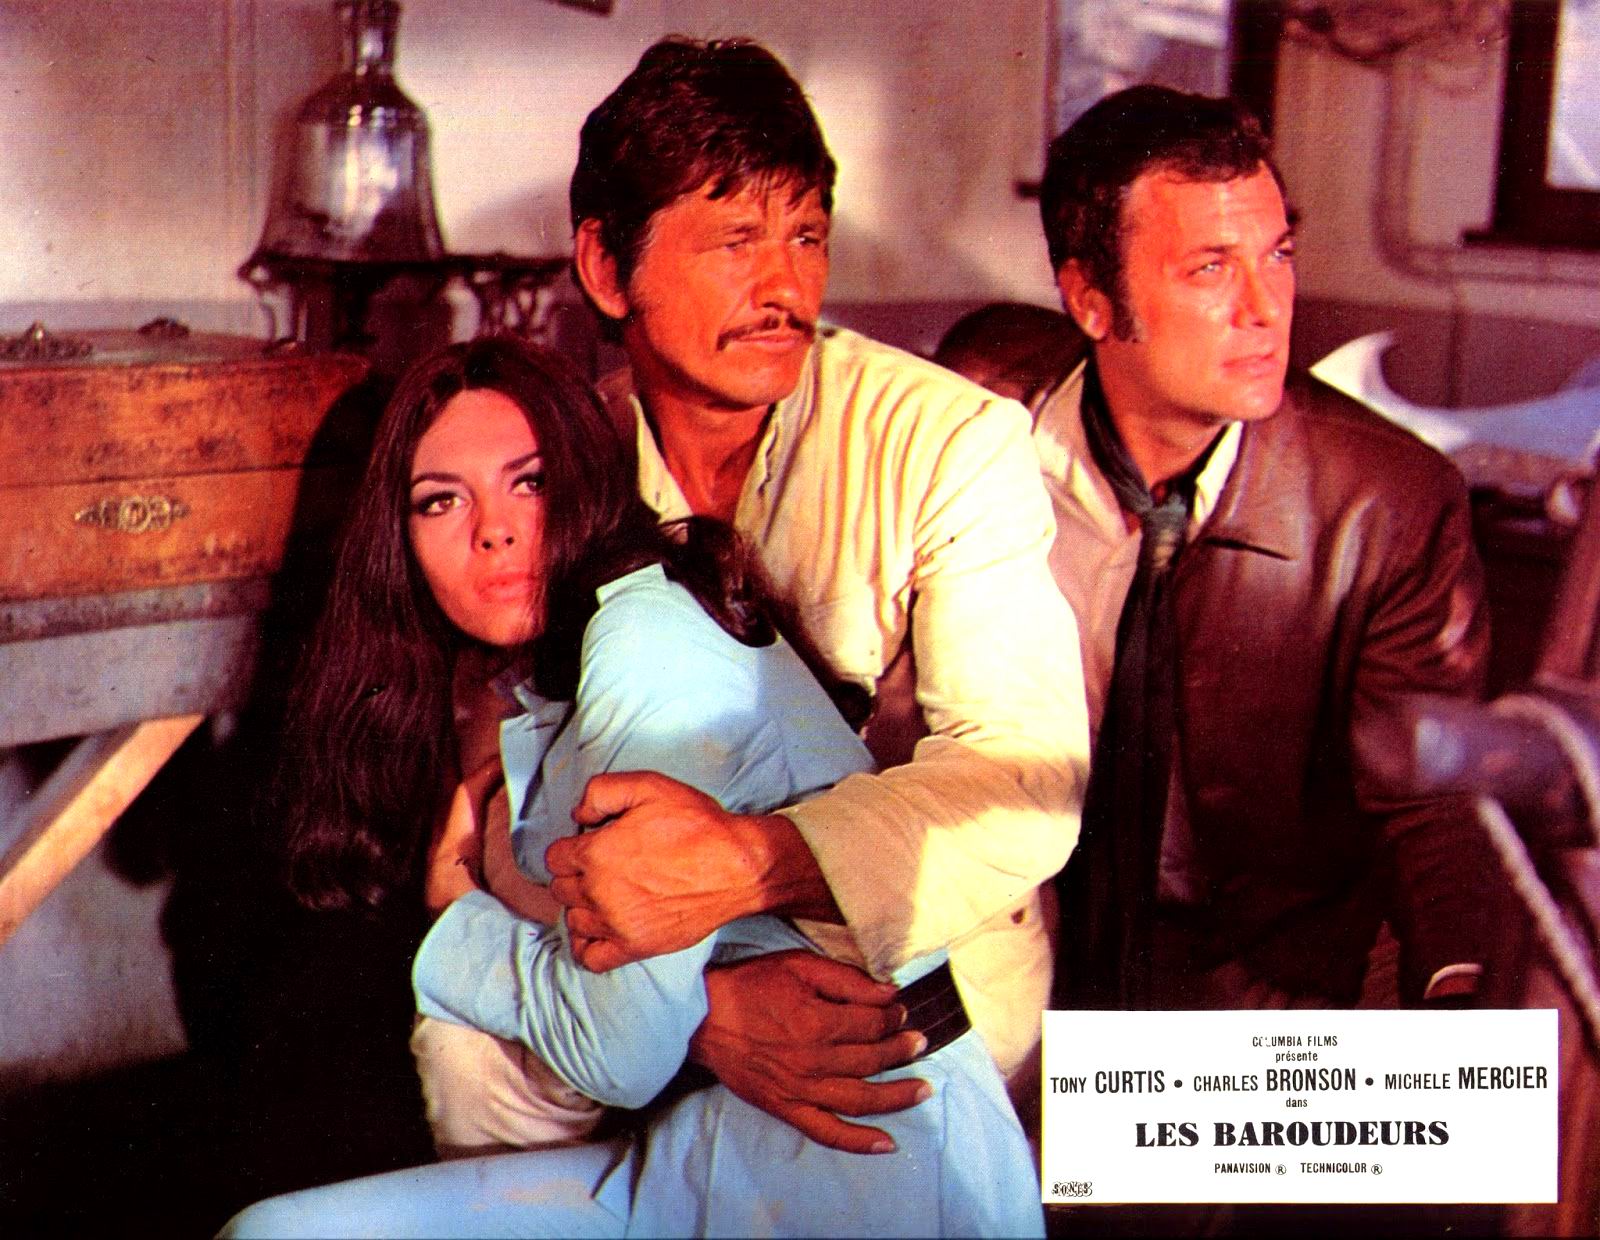 Les baroudeurs (1969) Peter Collinson - You can't win 'em all (21.07.1969 / 10.1969)